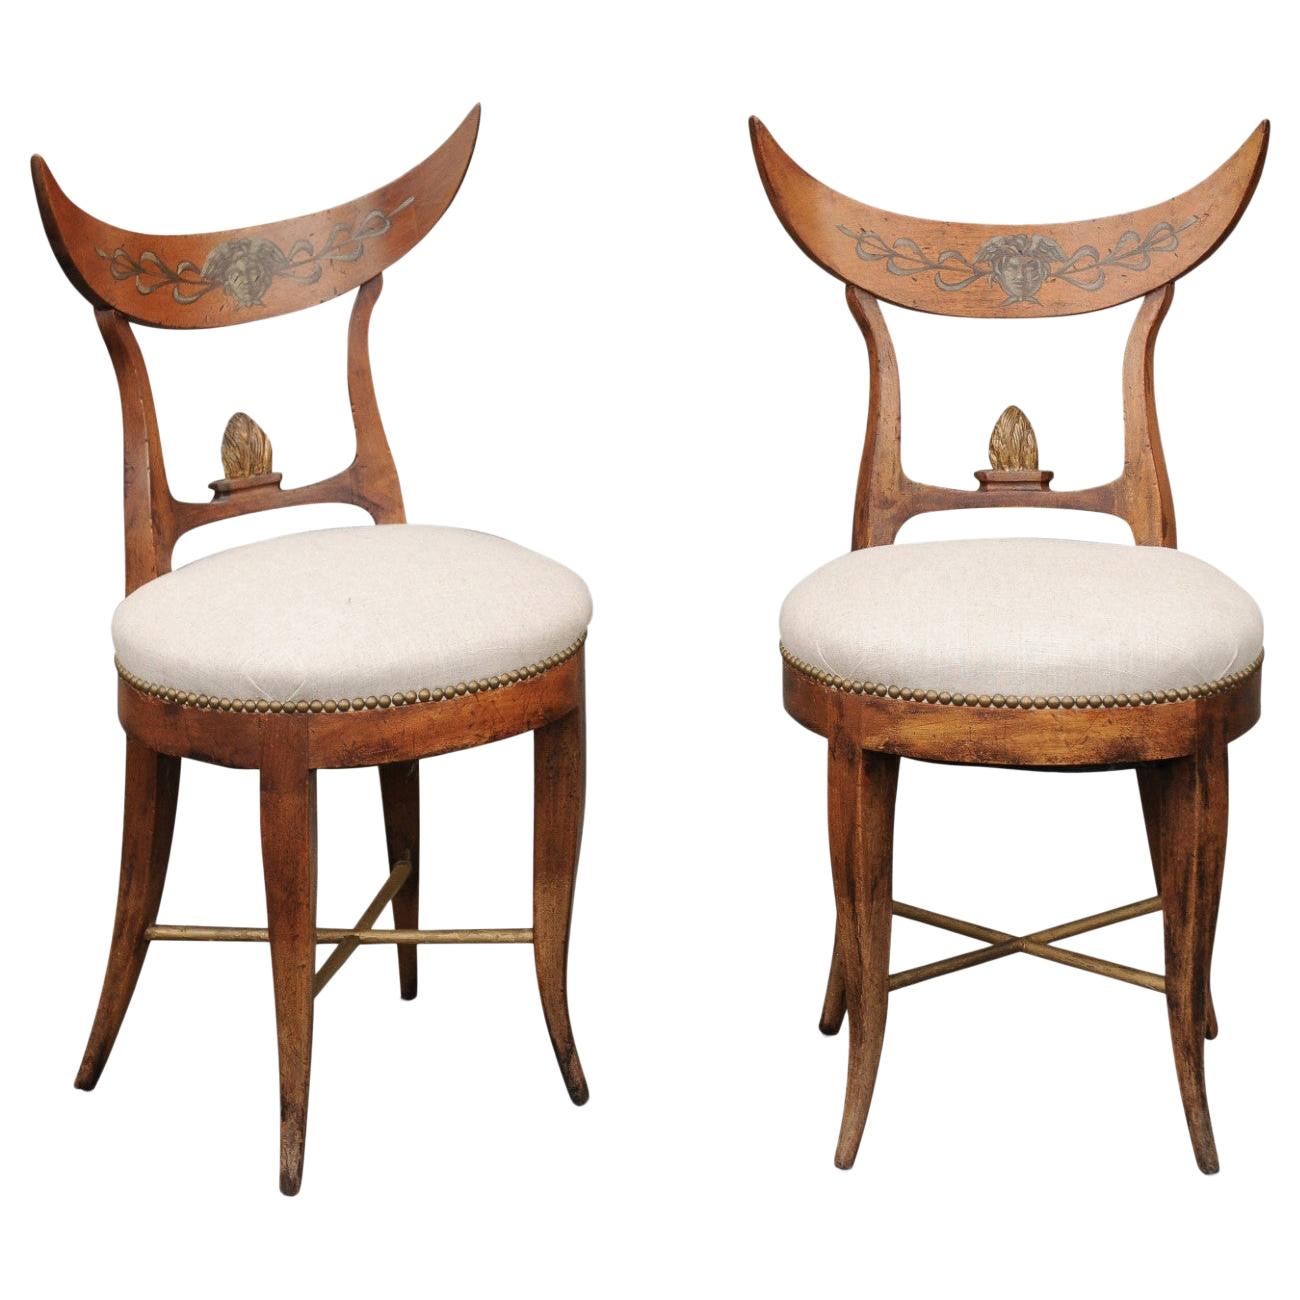 Pair of Italian 1860s Upholstered Side Chairs with Crescent Backs and Saber Legs For Sale